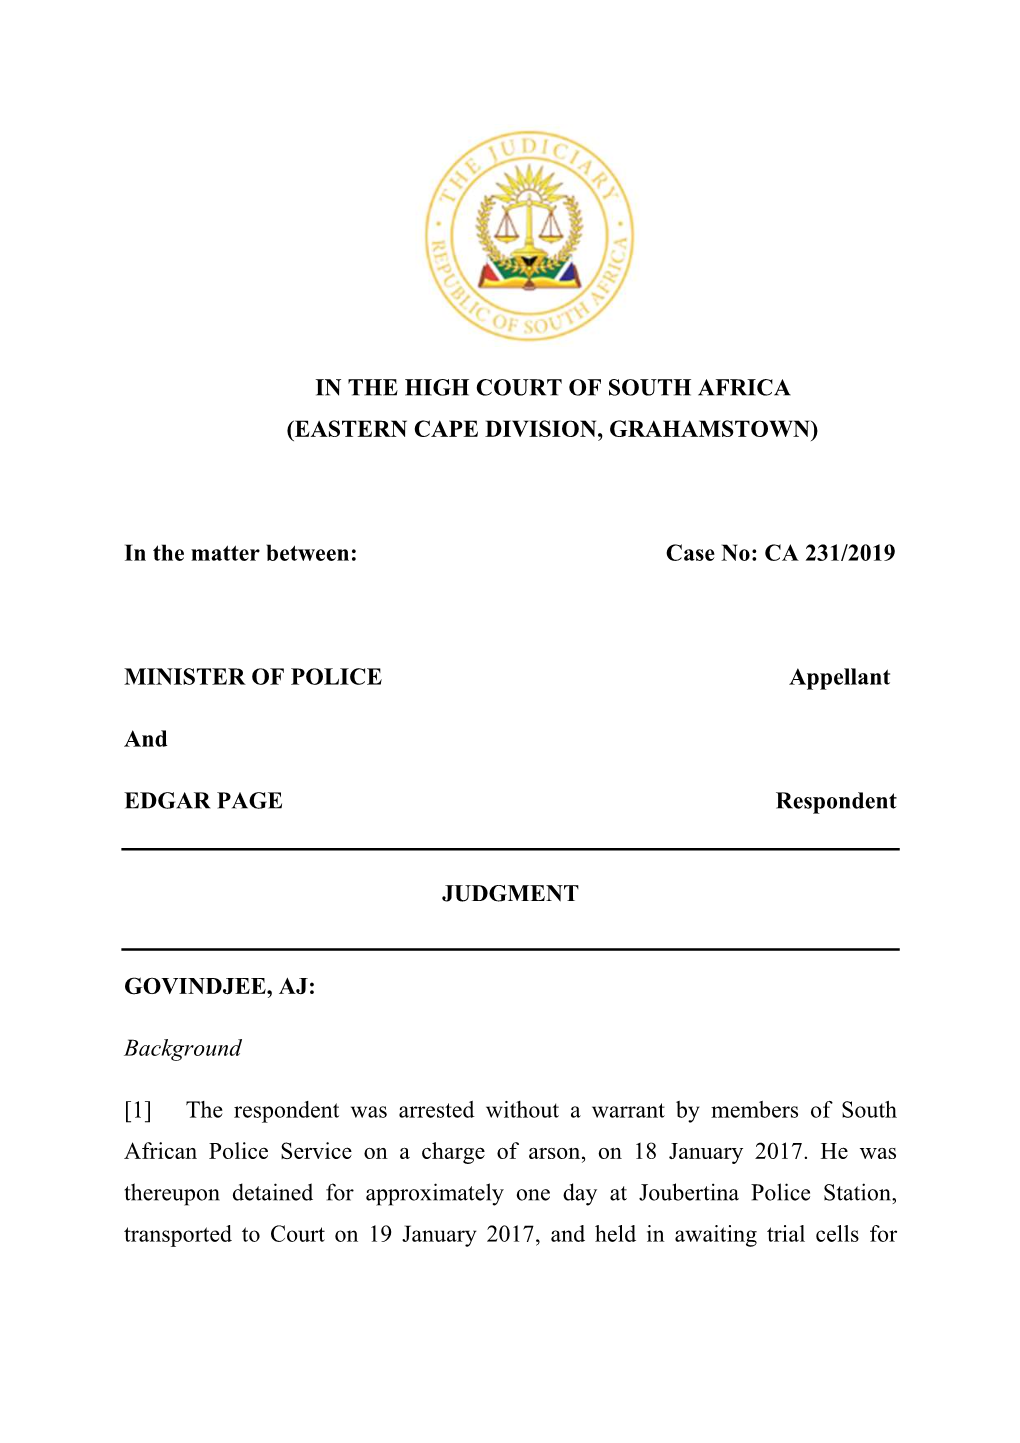 IN the HIGH COURT of SOUTH AFRICA (EASTERN CAPE DIVISION, GRAHAMSTOWN) in the Matter Between: Case No: CA 231/2019 MINISTER OF